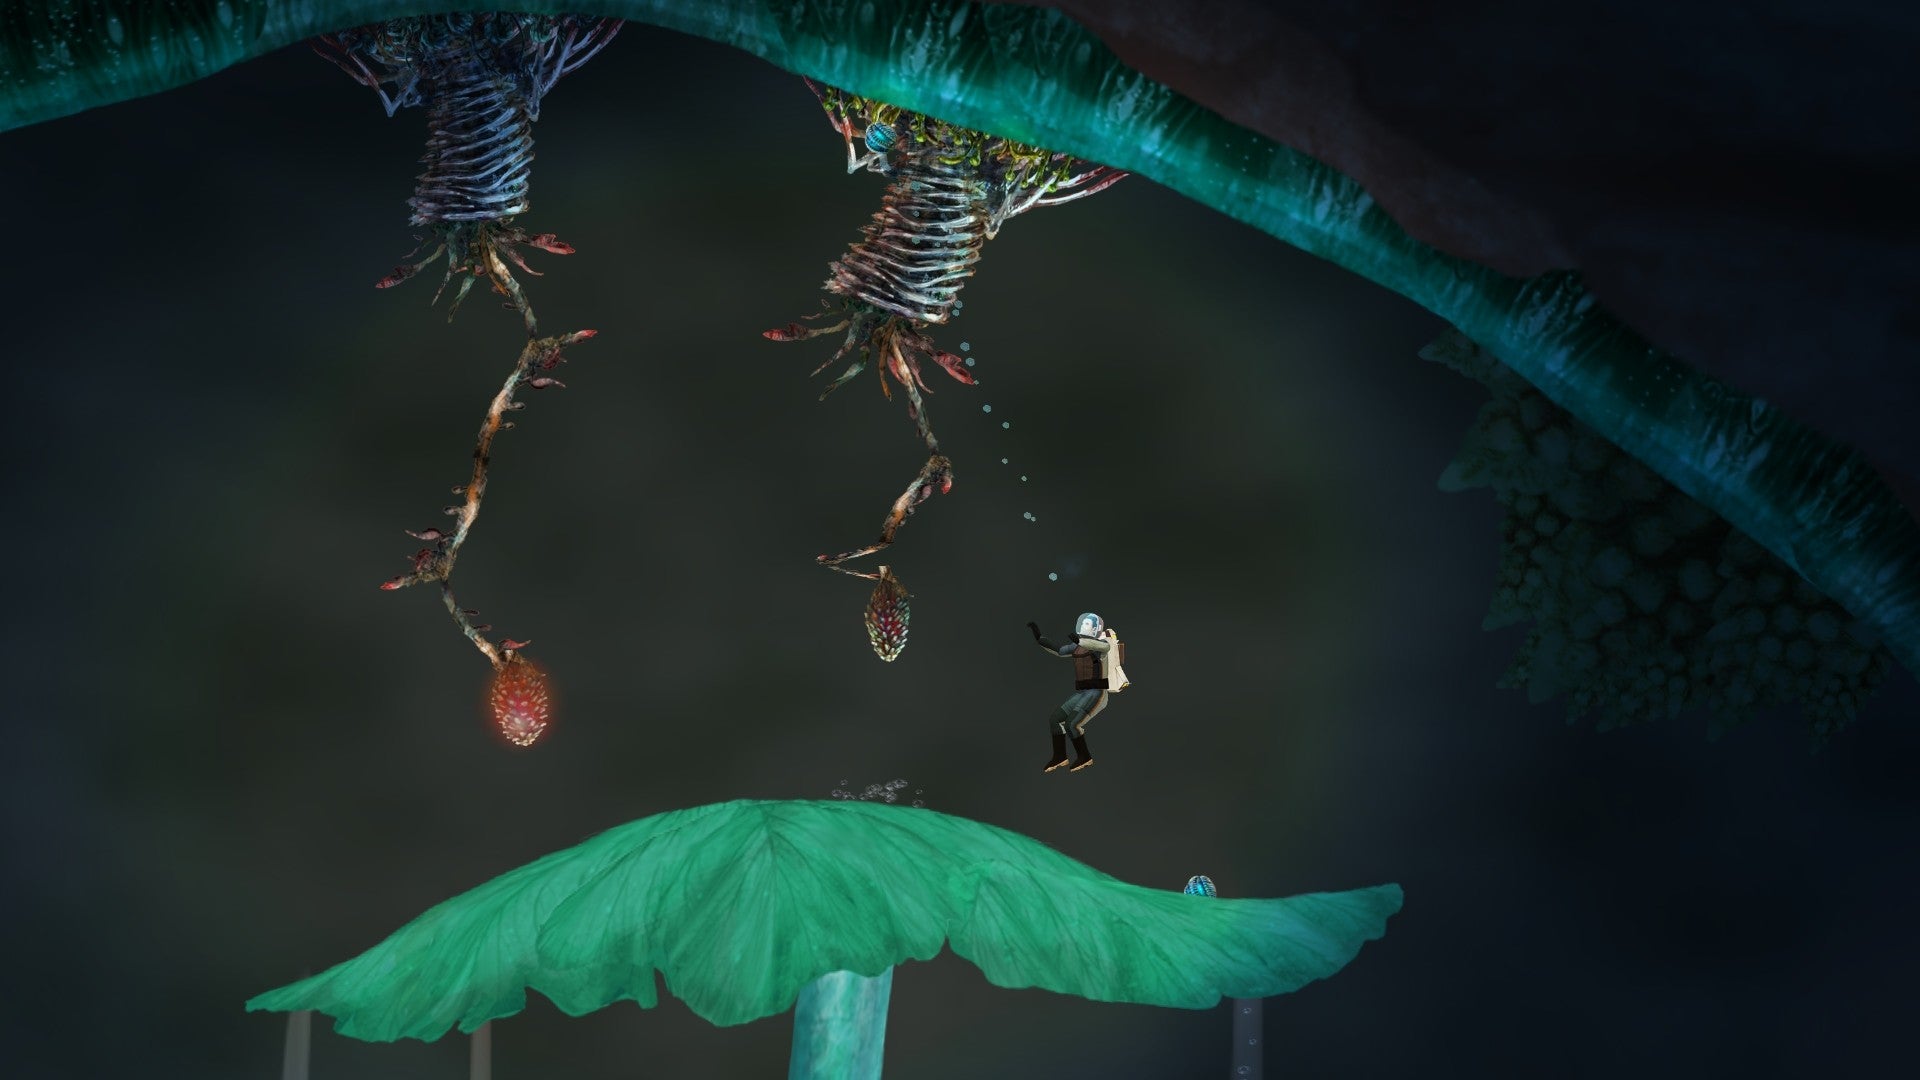 Action gardening in Waking Mars: the player, sideways on a platform, jumps on a giant green leaf and fights two spiky, dangerous-looking Venus flytrap plants hanging from the ceiling.